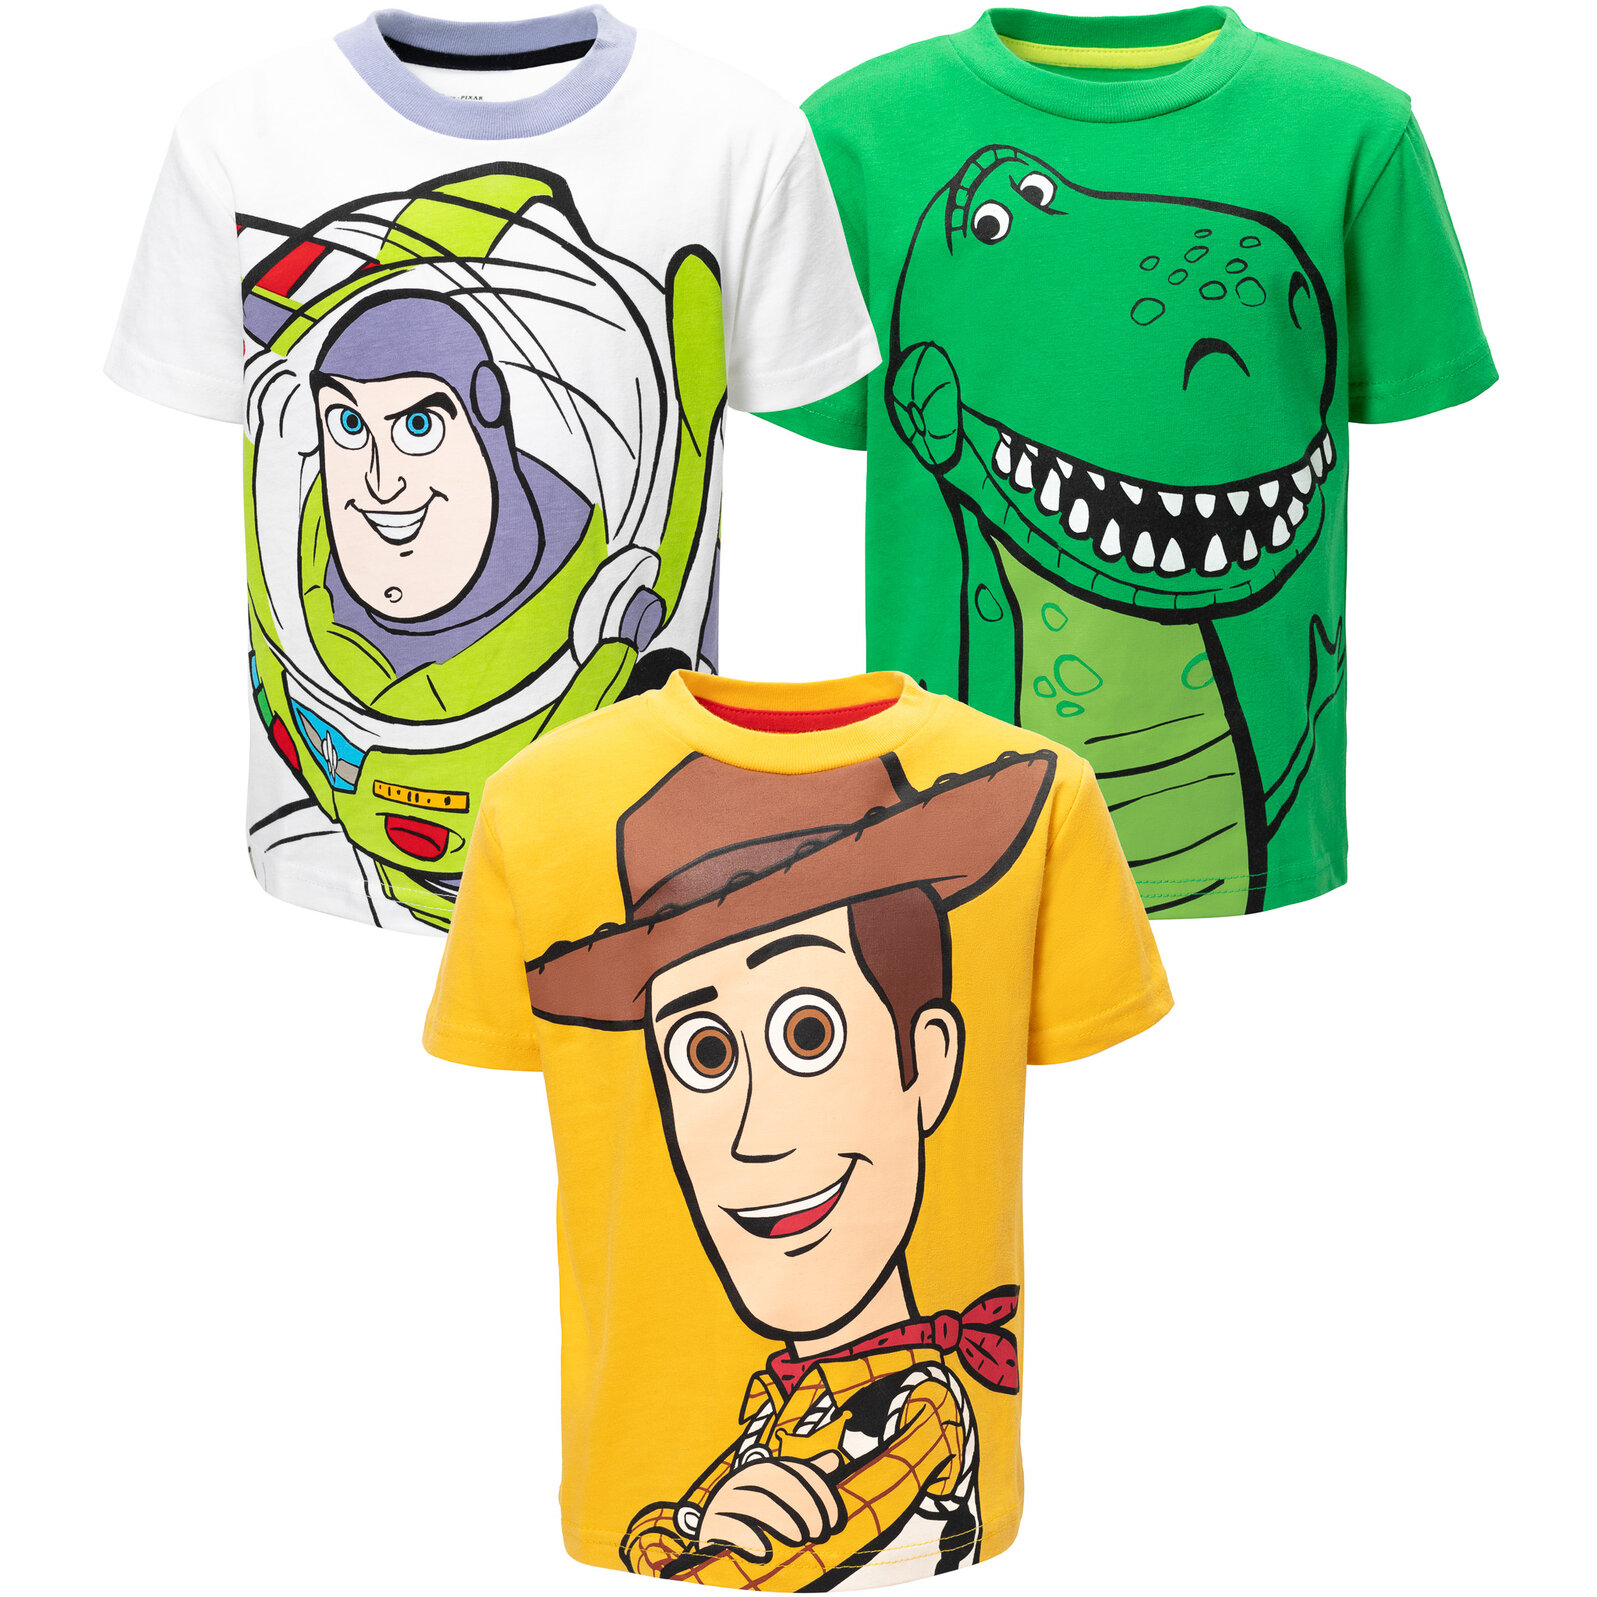 Disney Pixar Toy Story Woody Buzz Lightyear Rex Little Boys 3 Pack T-Shirts Toddler to Big Kid - image 1 of 5